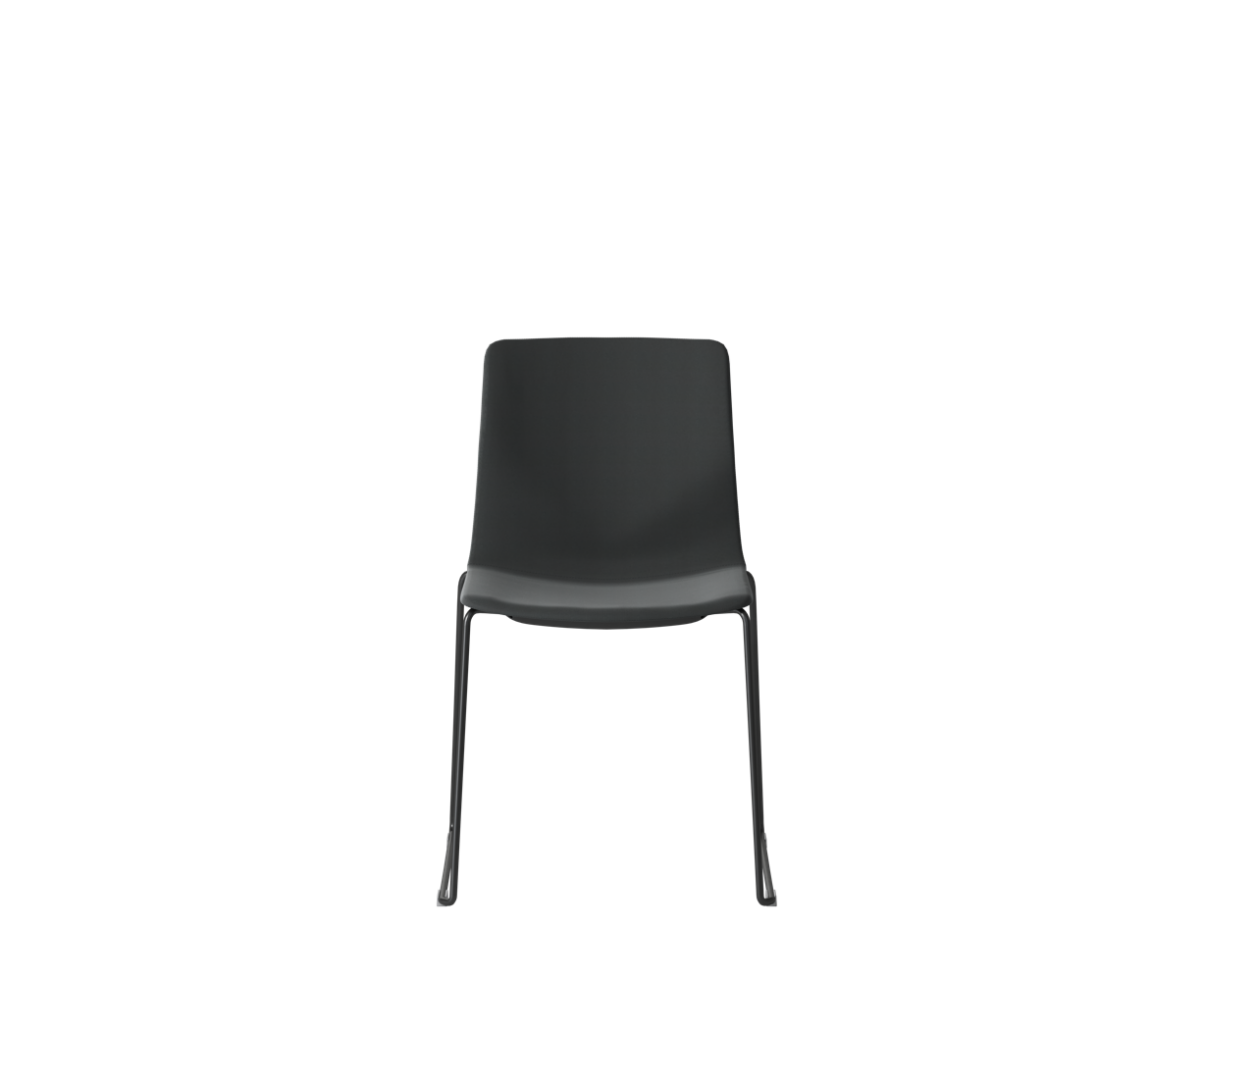 OCEE&FOUR – Chairs – FourSure 88 – Plastic shell - Fully Upholstered - Skid frame - Packshot Image 5 Large